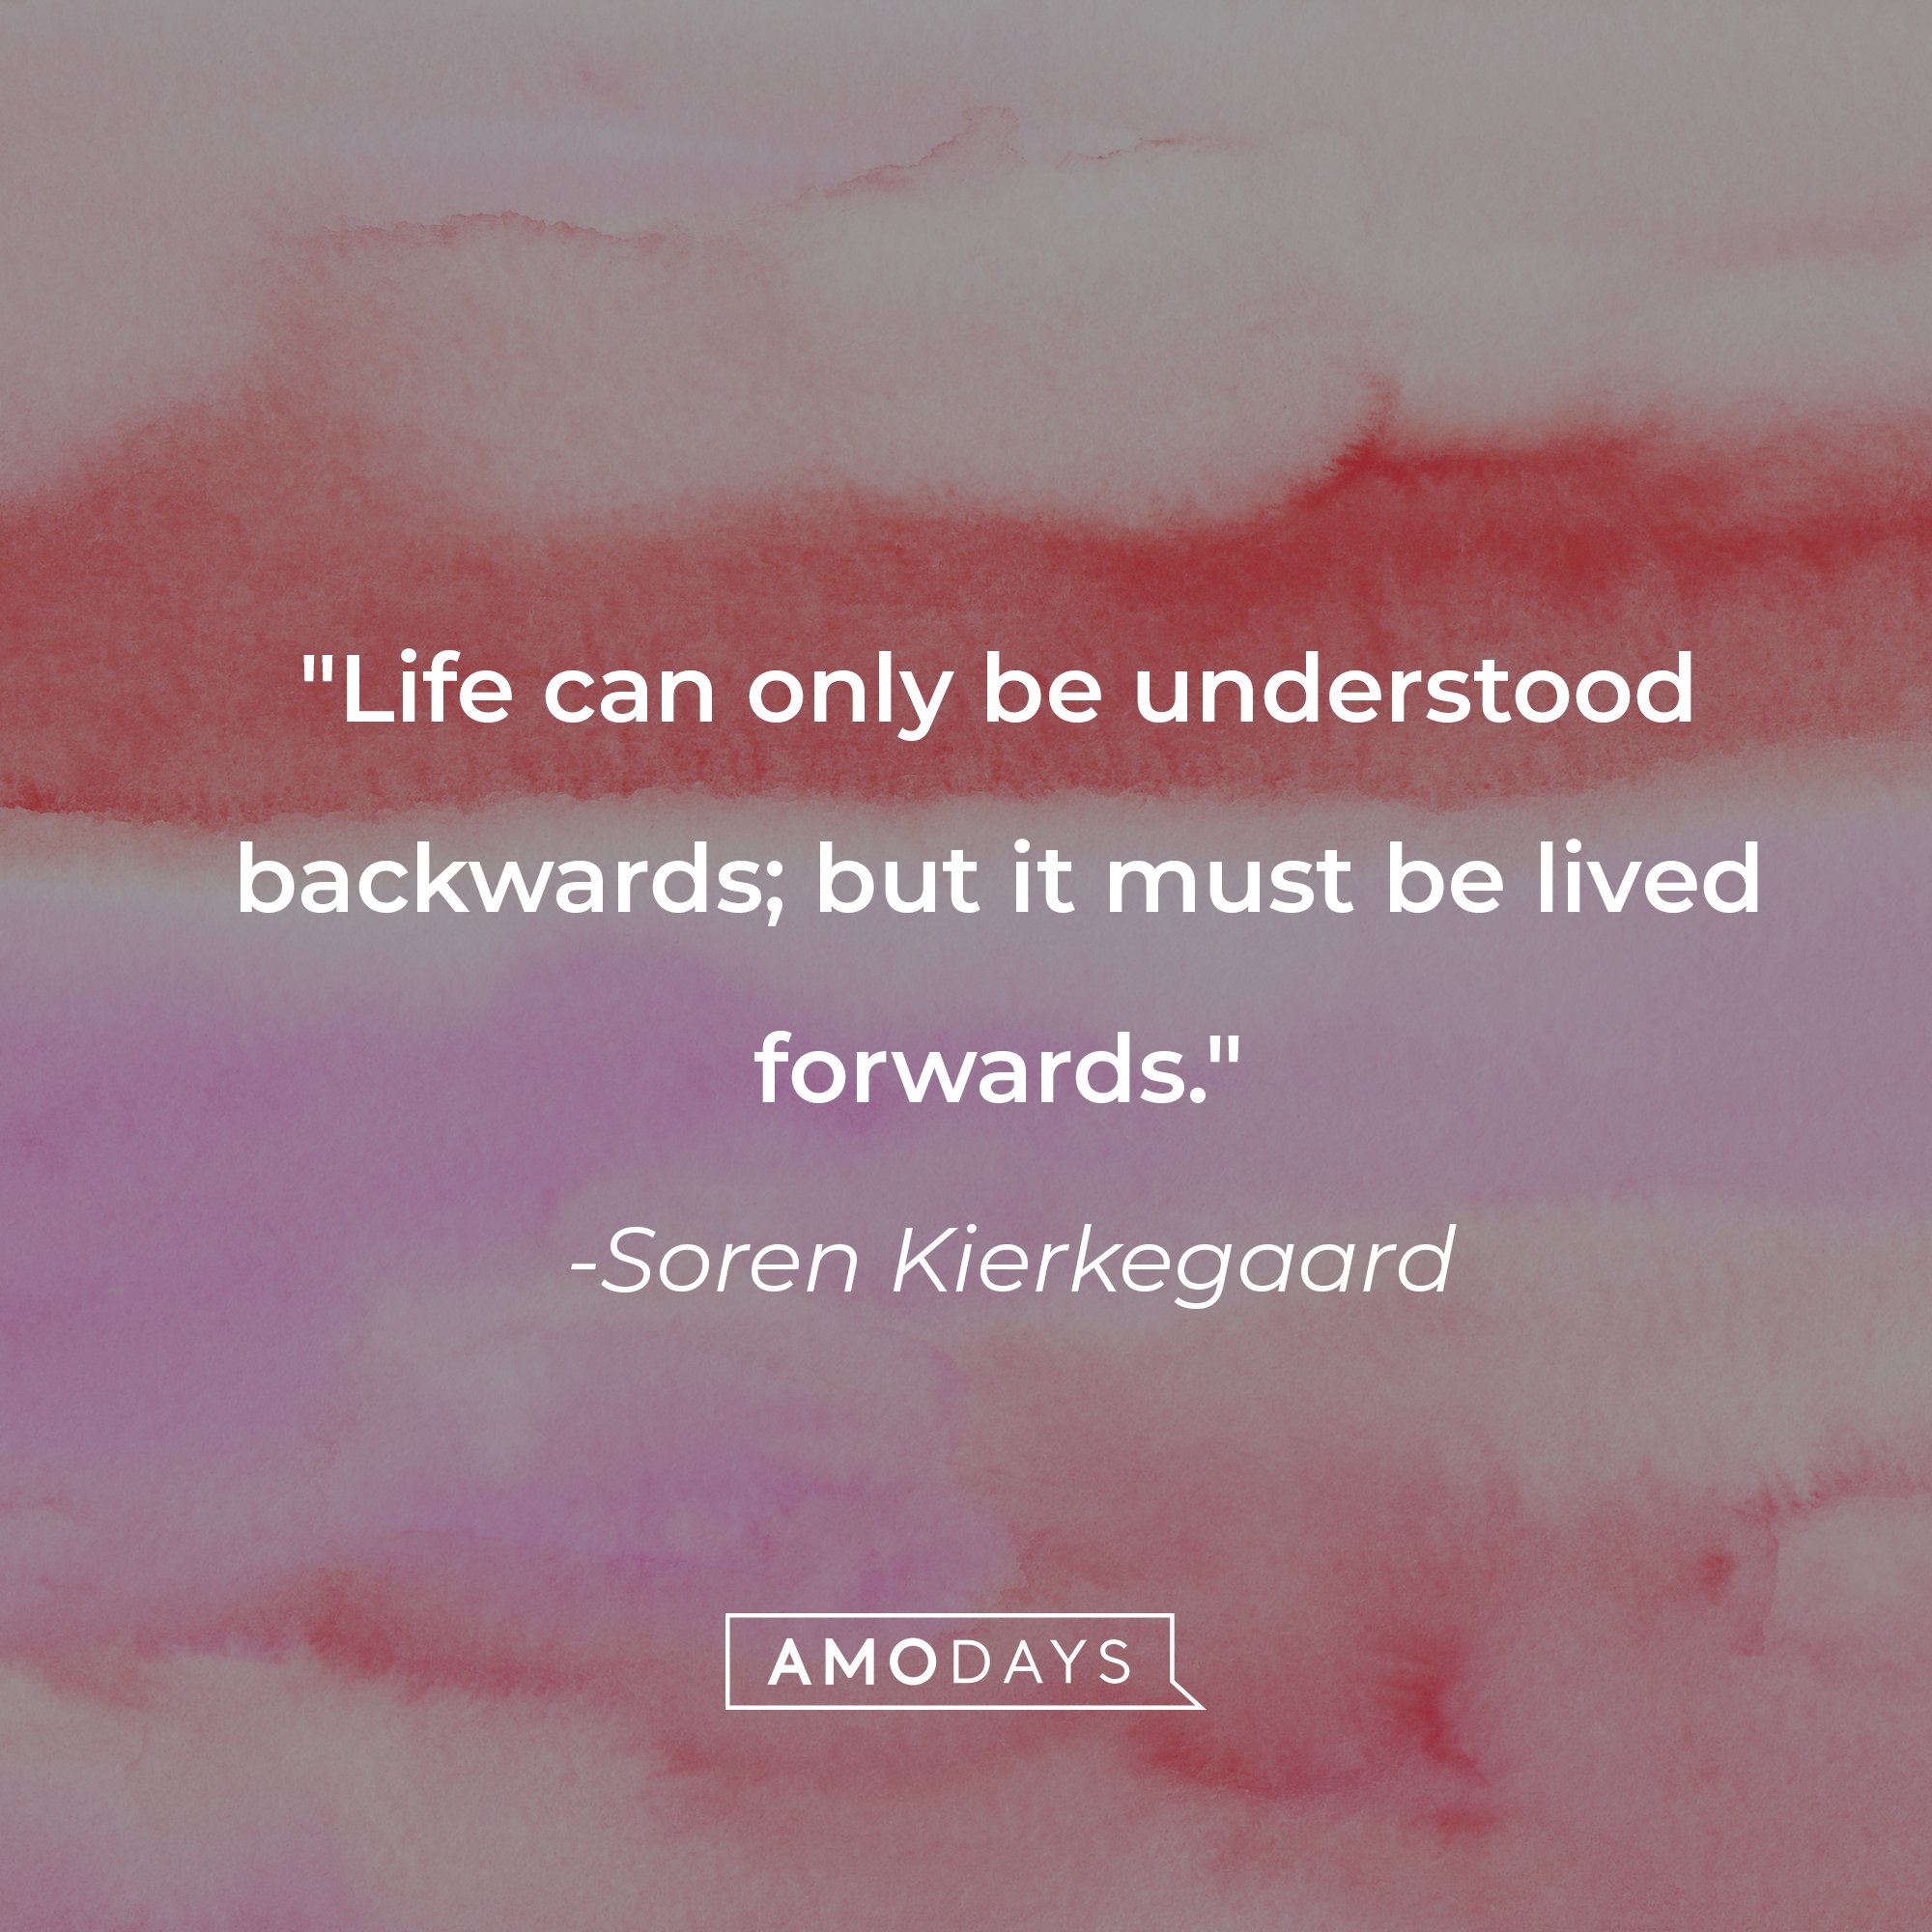 Soren Kierkegaard's quote: "Life can only be understood backwards; but it must be lived forwards." | Source: AmoDays